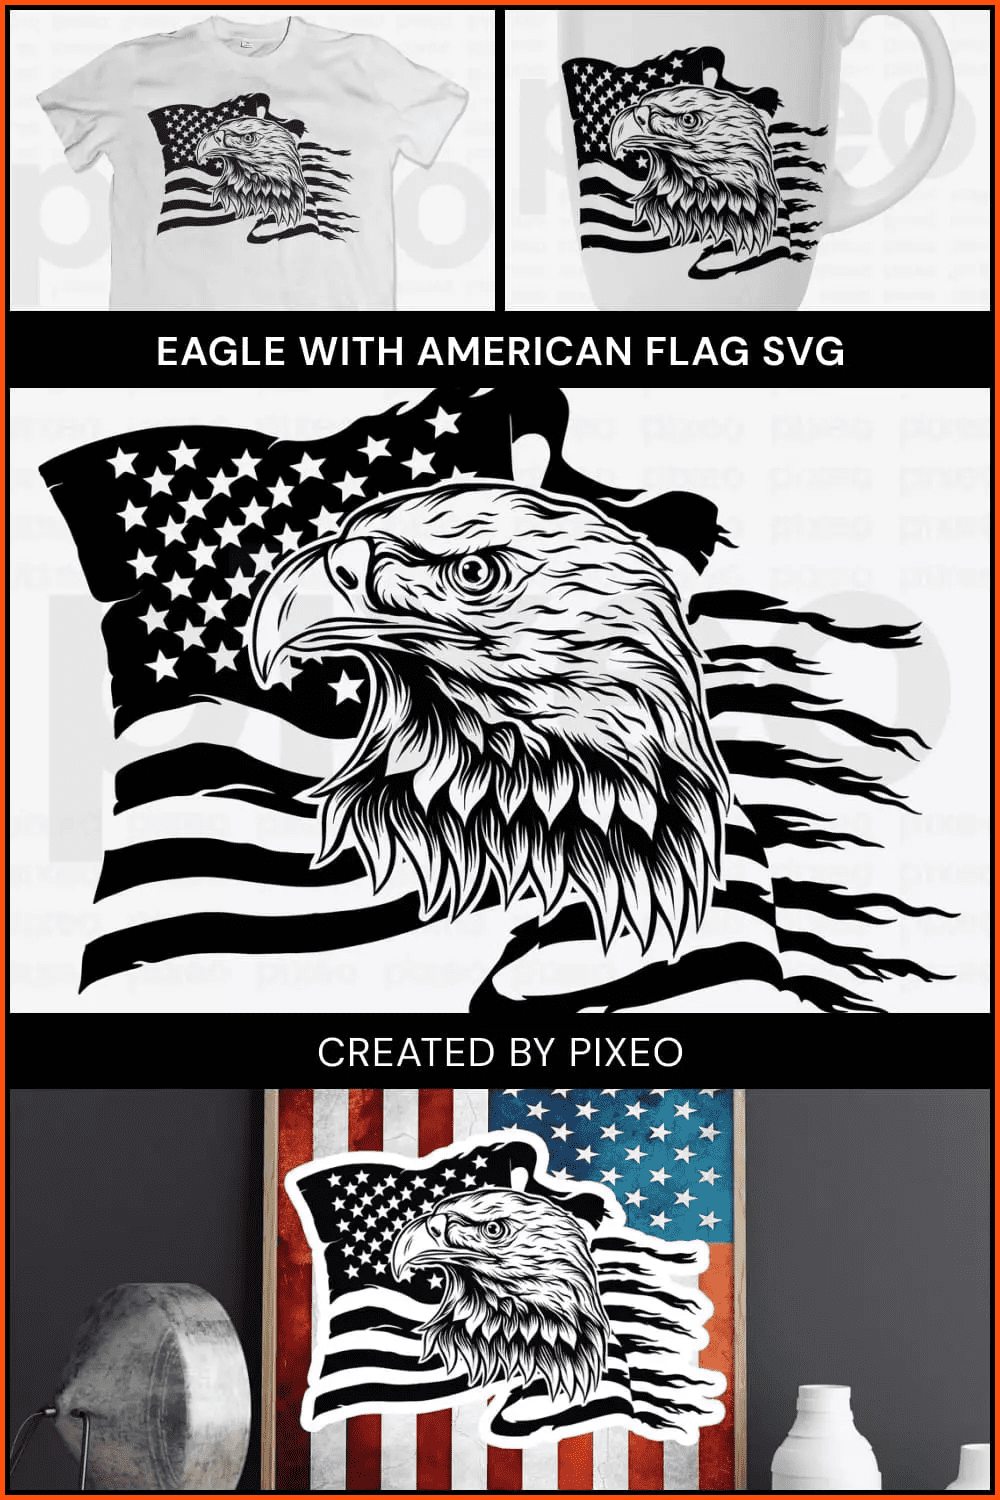 Eagle with American Flag SVG.